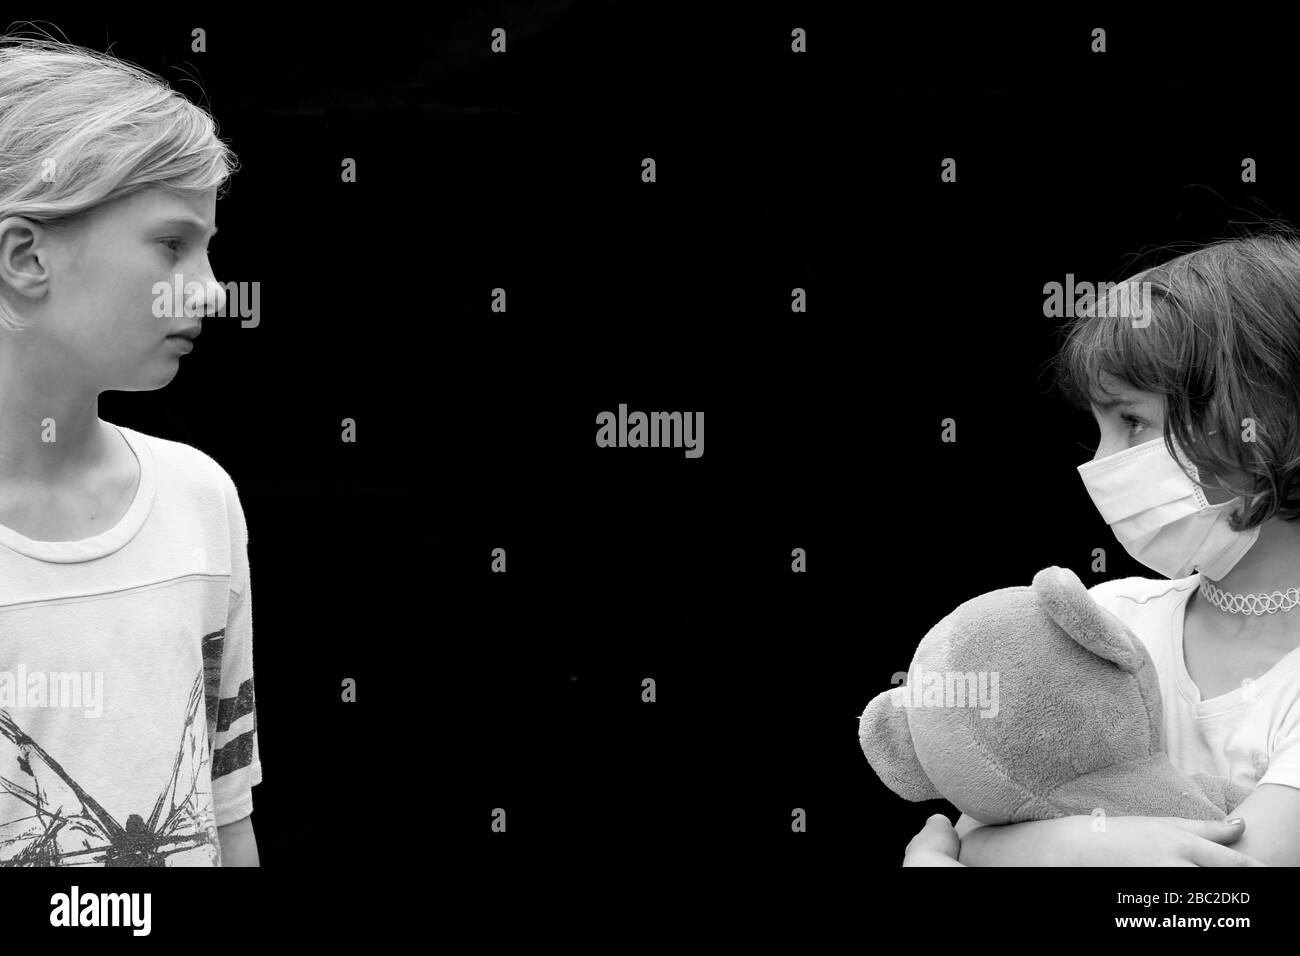 Black and white portrait of social distance between two young children, one wearing face mask and holding teddy bear Stock Photo